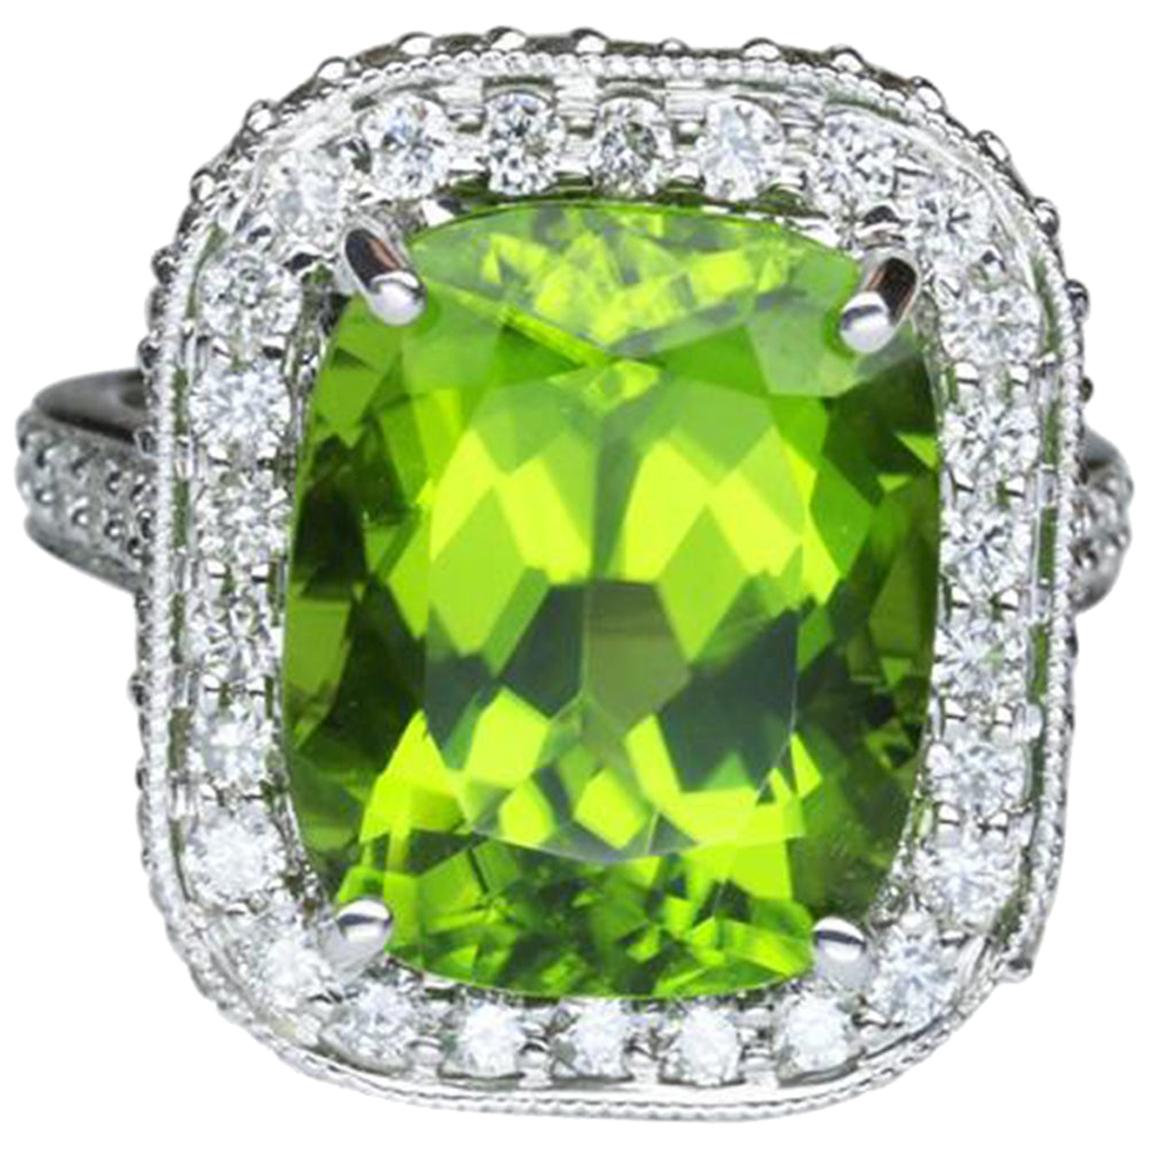 9.54 Carat Cushion Cut Peridot Gold Engagement Ring Estate Fine Jewelry For Sale